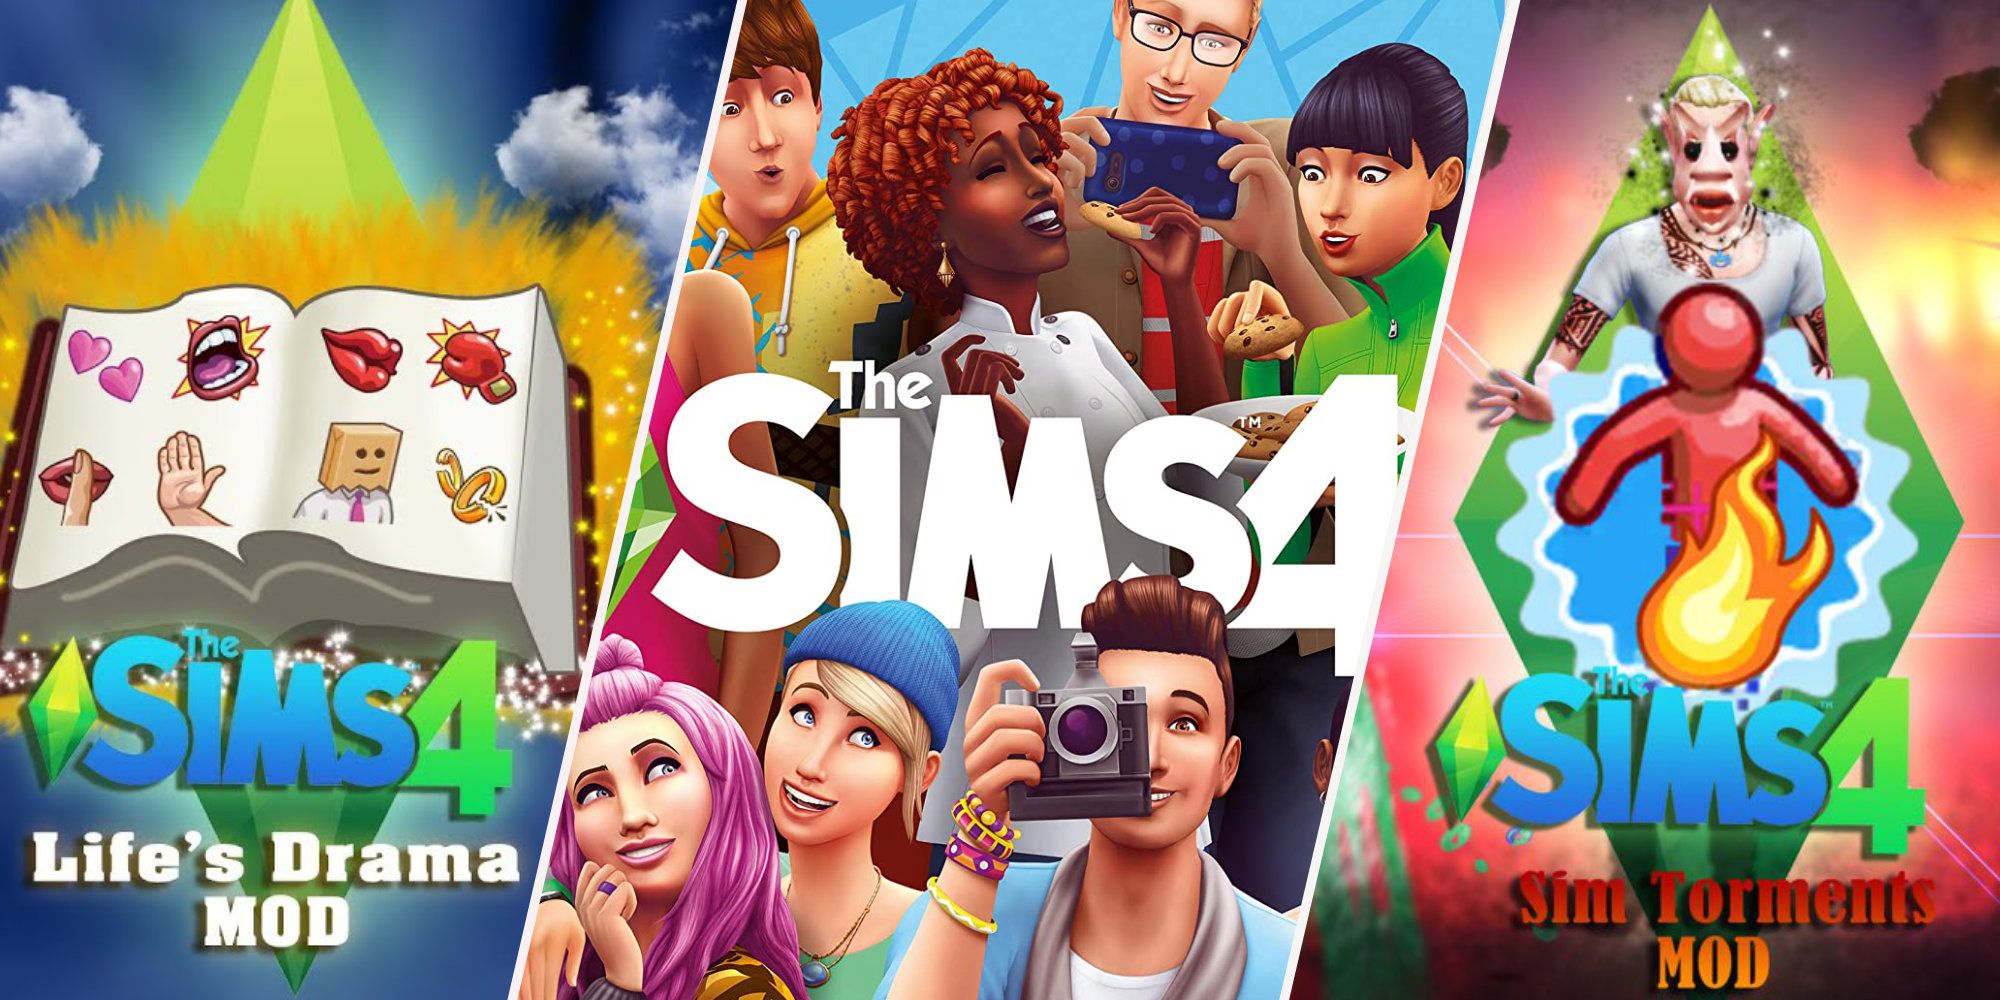 can you download mods on the sims 4 if its pirated